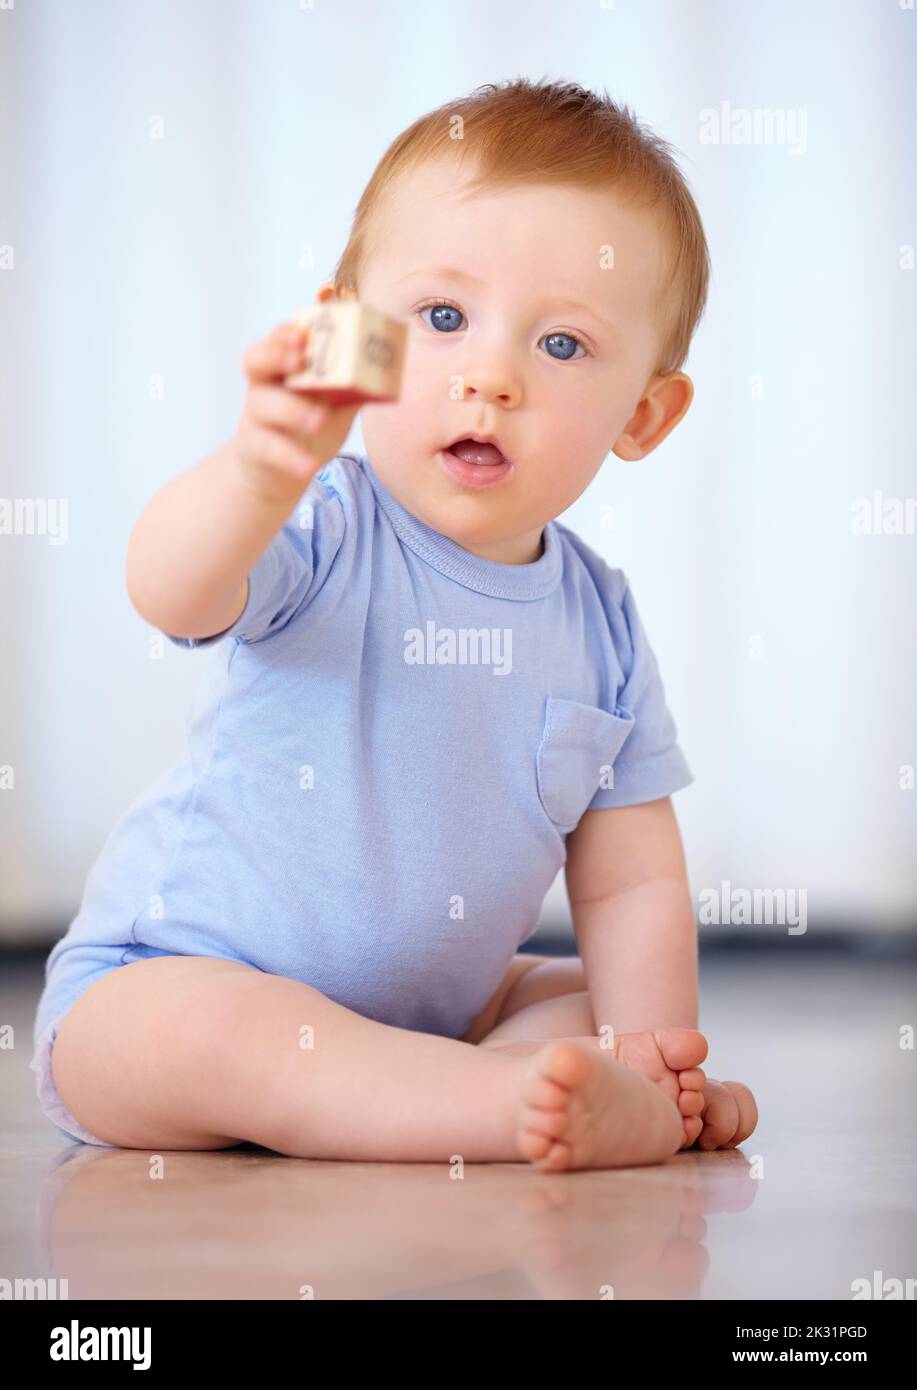 Growing up in the safety of home. an adorable baby boy in his home. Stock Photo